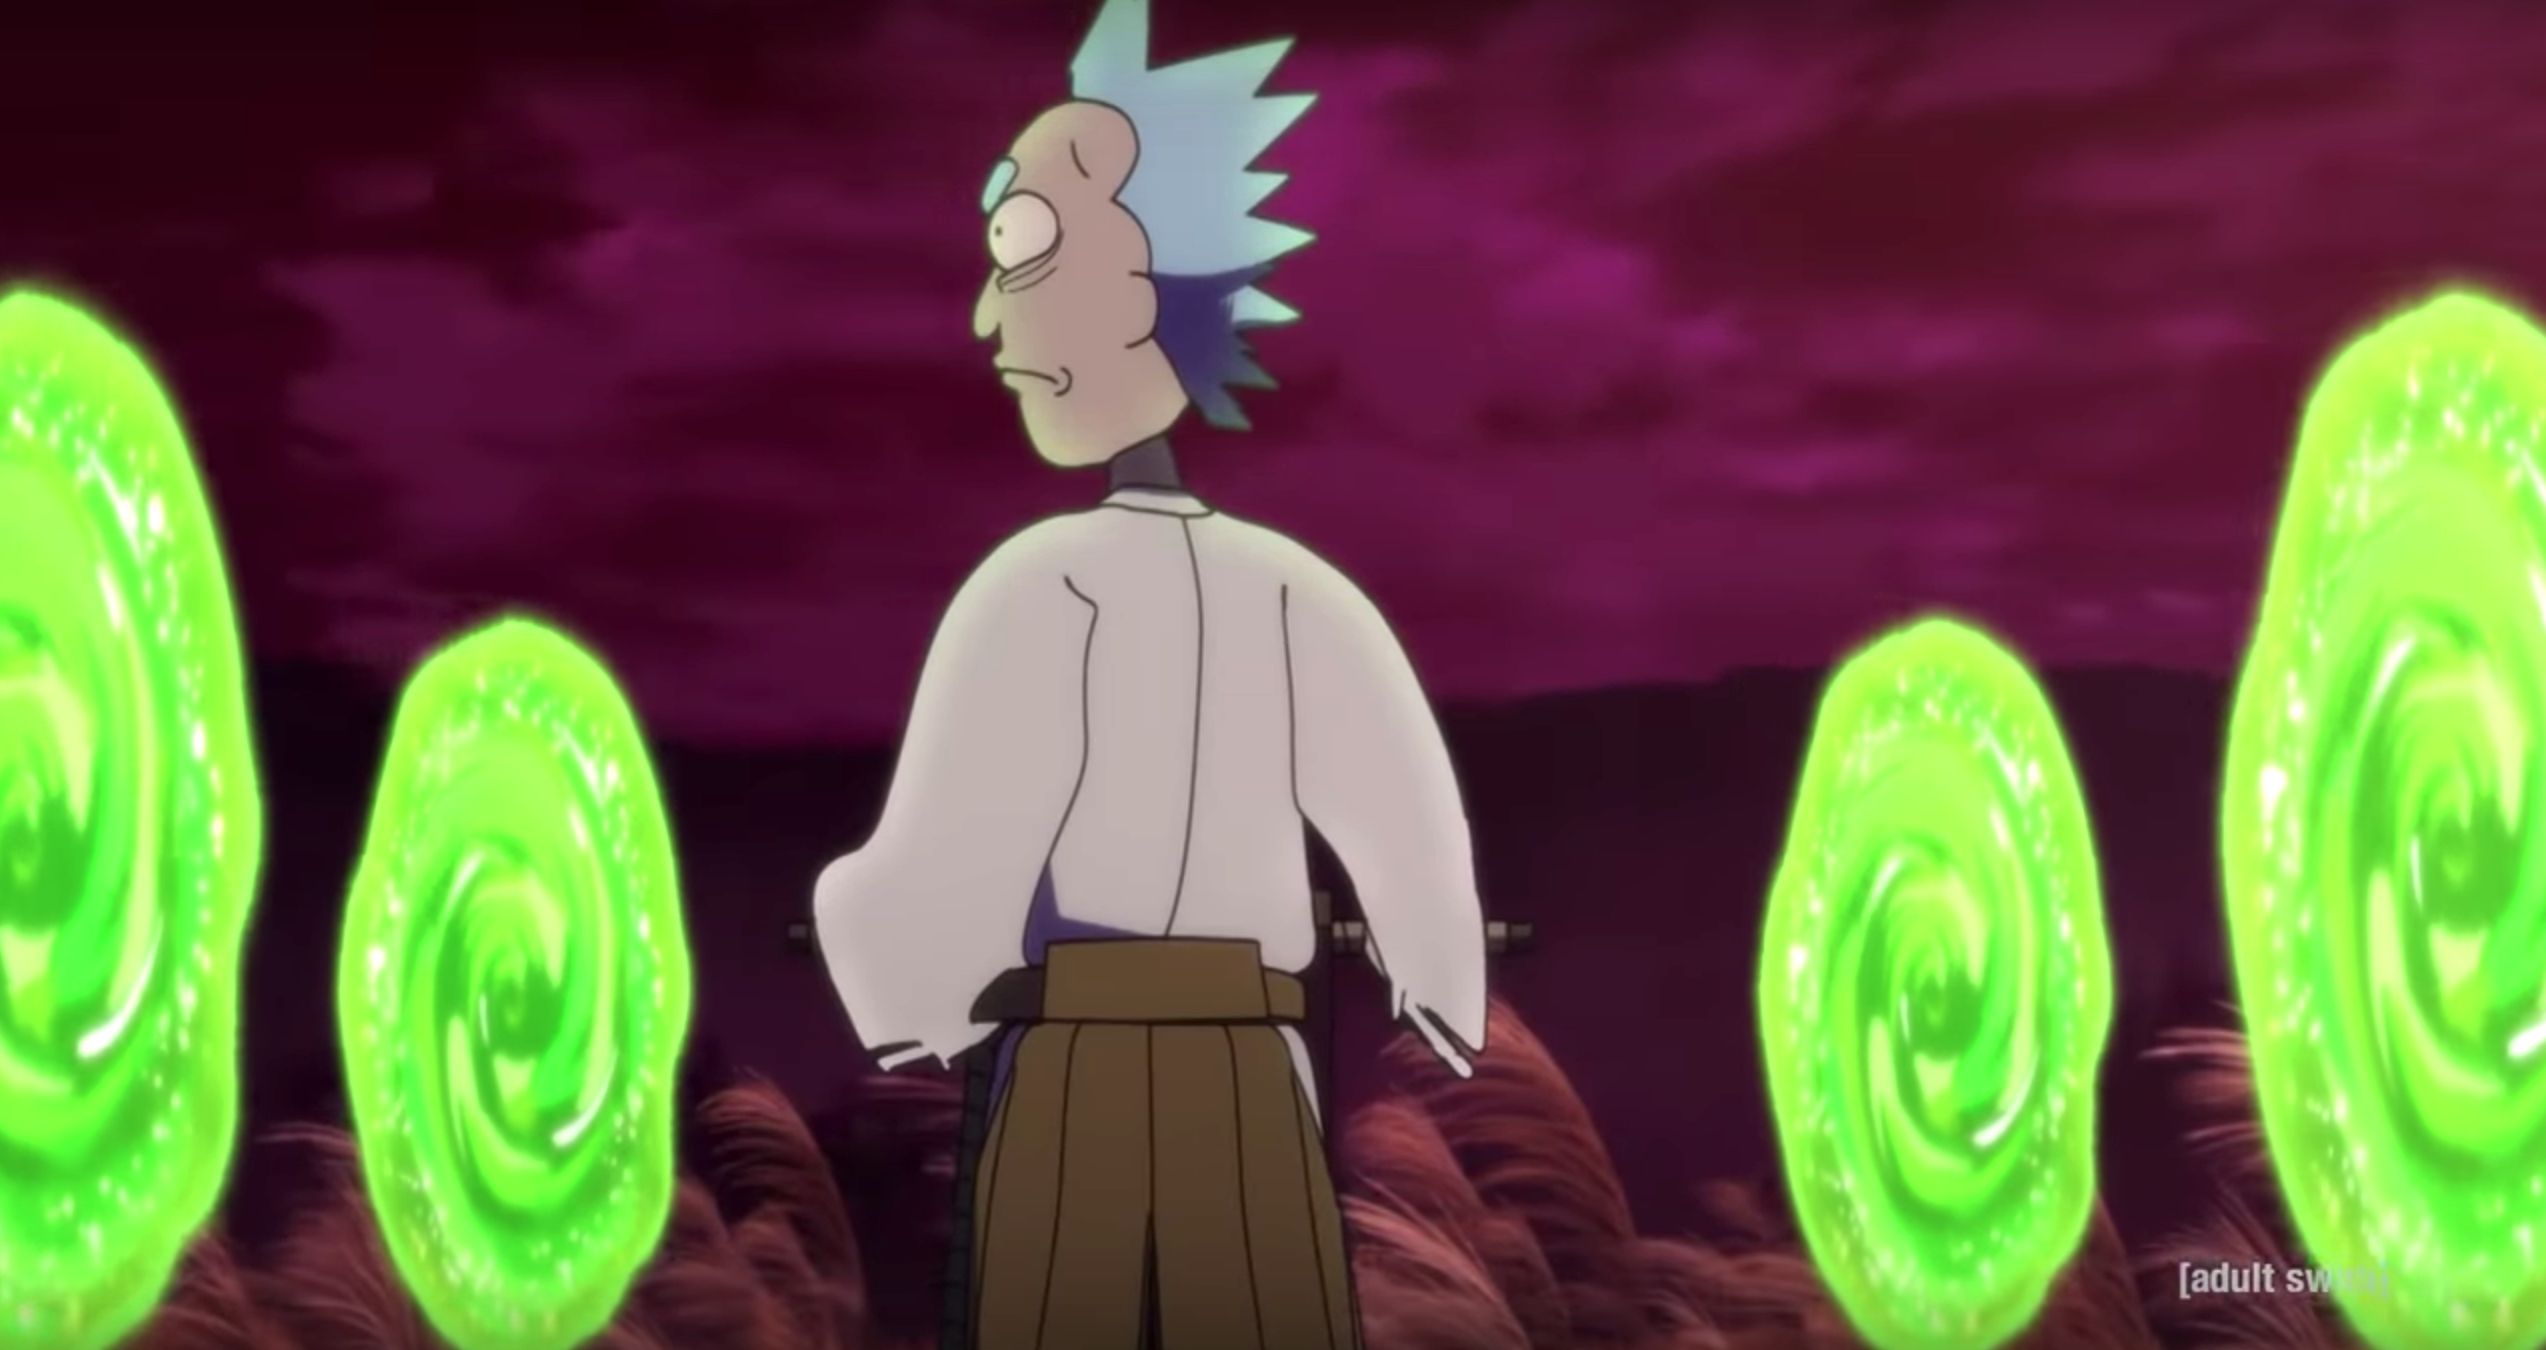 Rick and Morty drops new anime short inspired by Neon Genesis Evangelion   SYFY WIRE